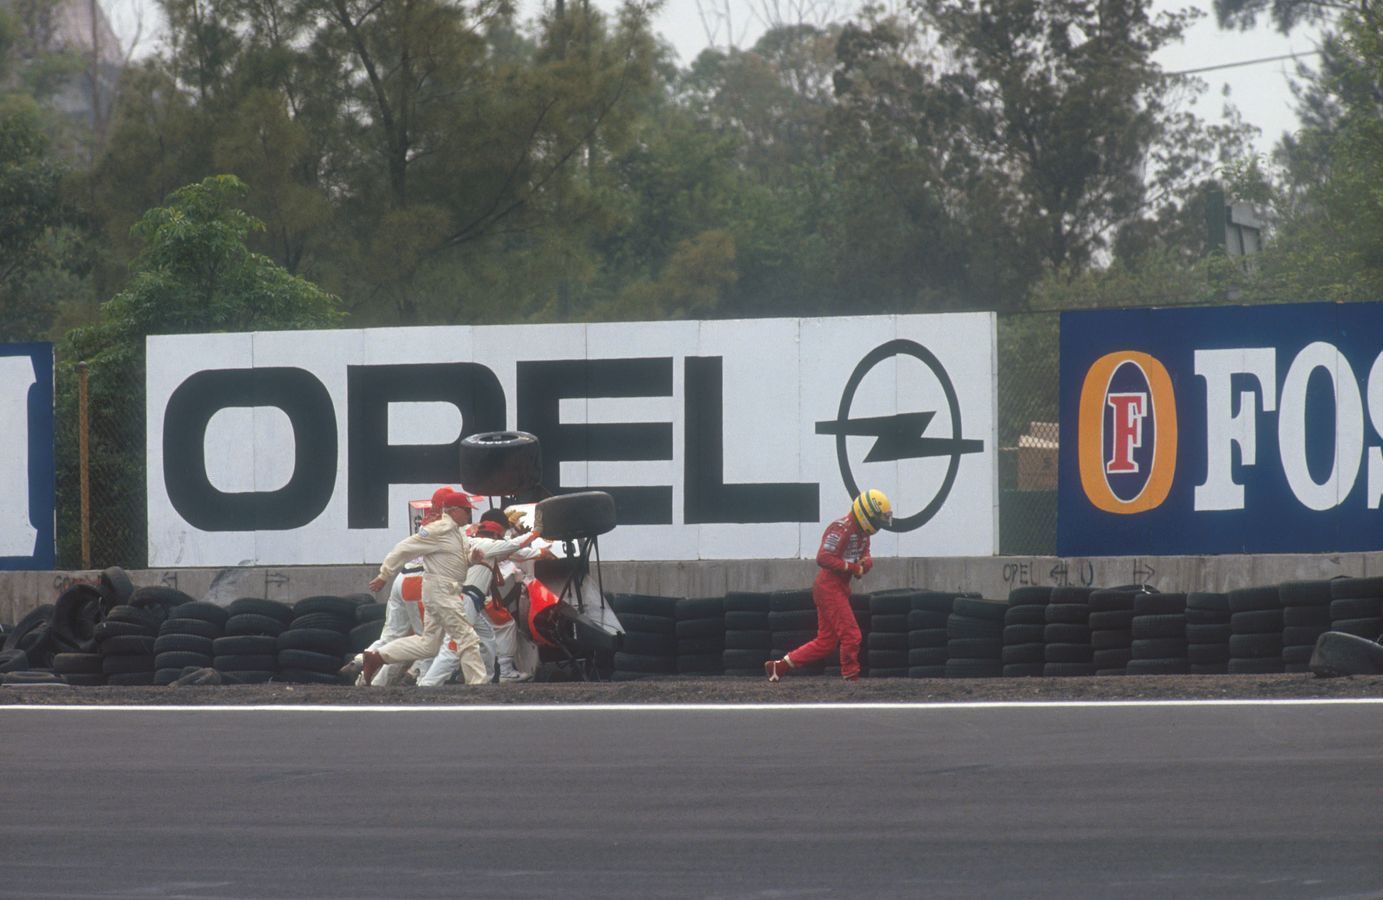 Ayrton was thankfully unhurt in the accident